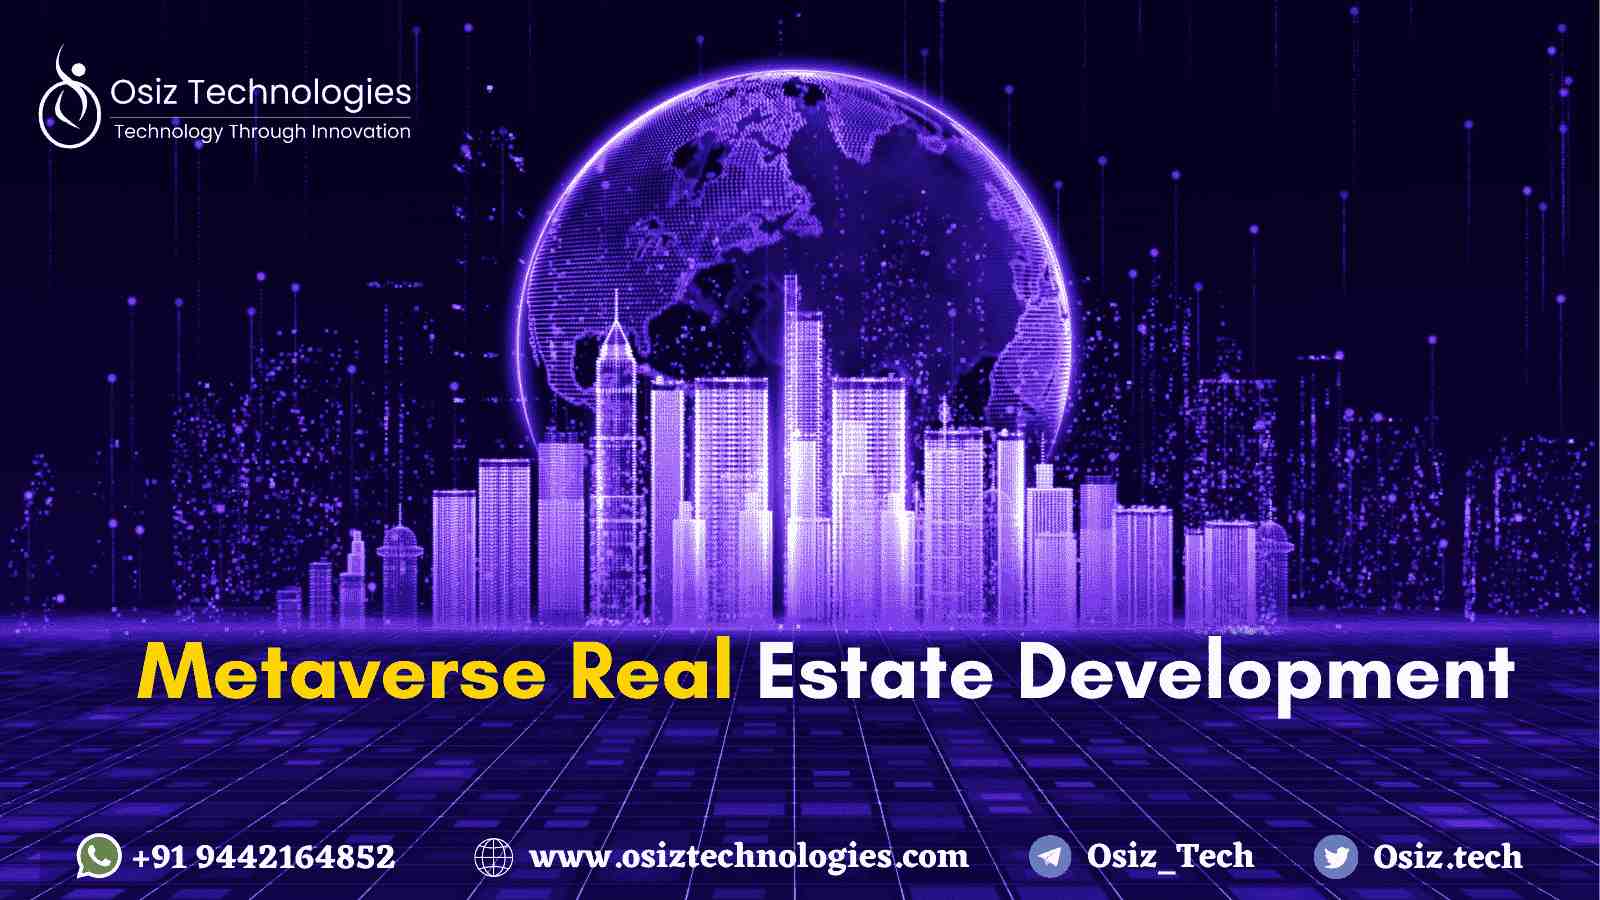 Metaverse Real Estate Development - To build a business in real estate virtually